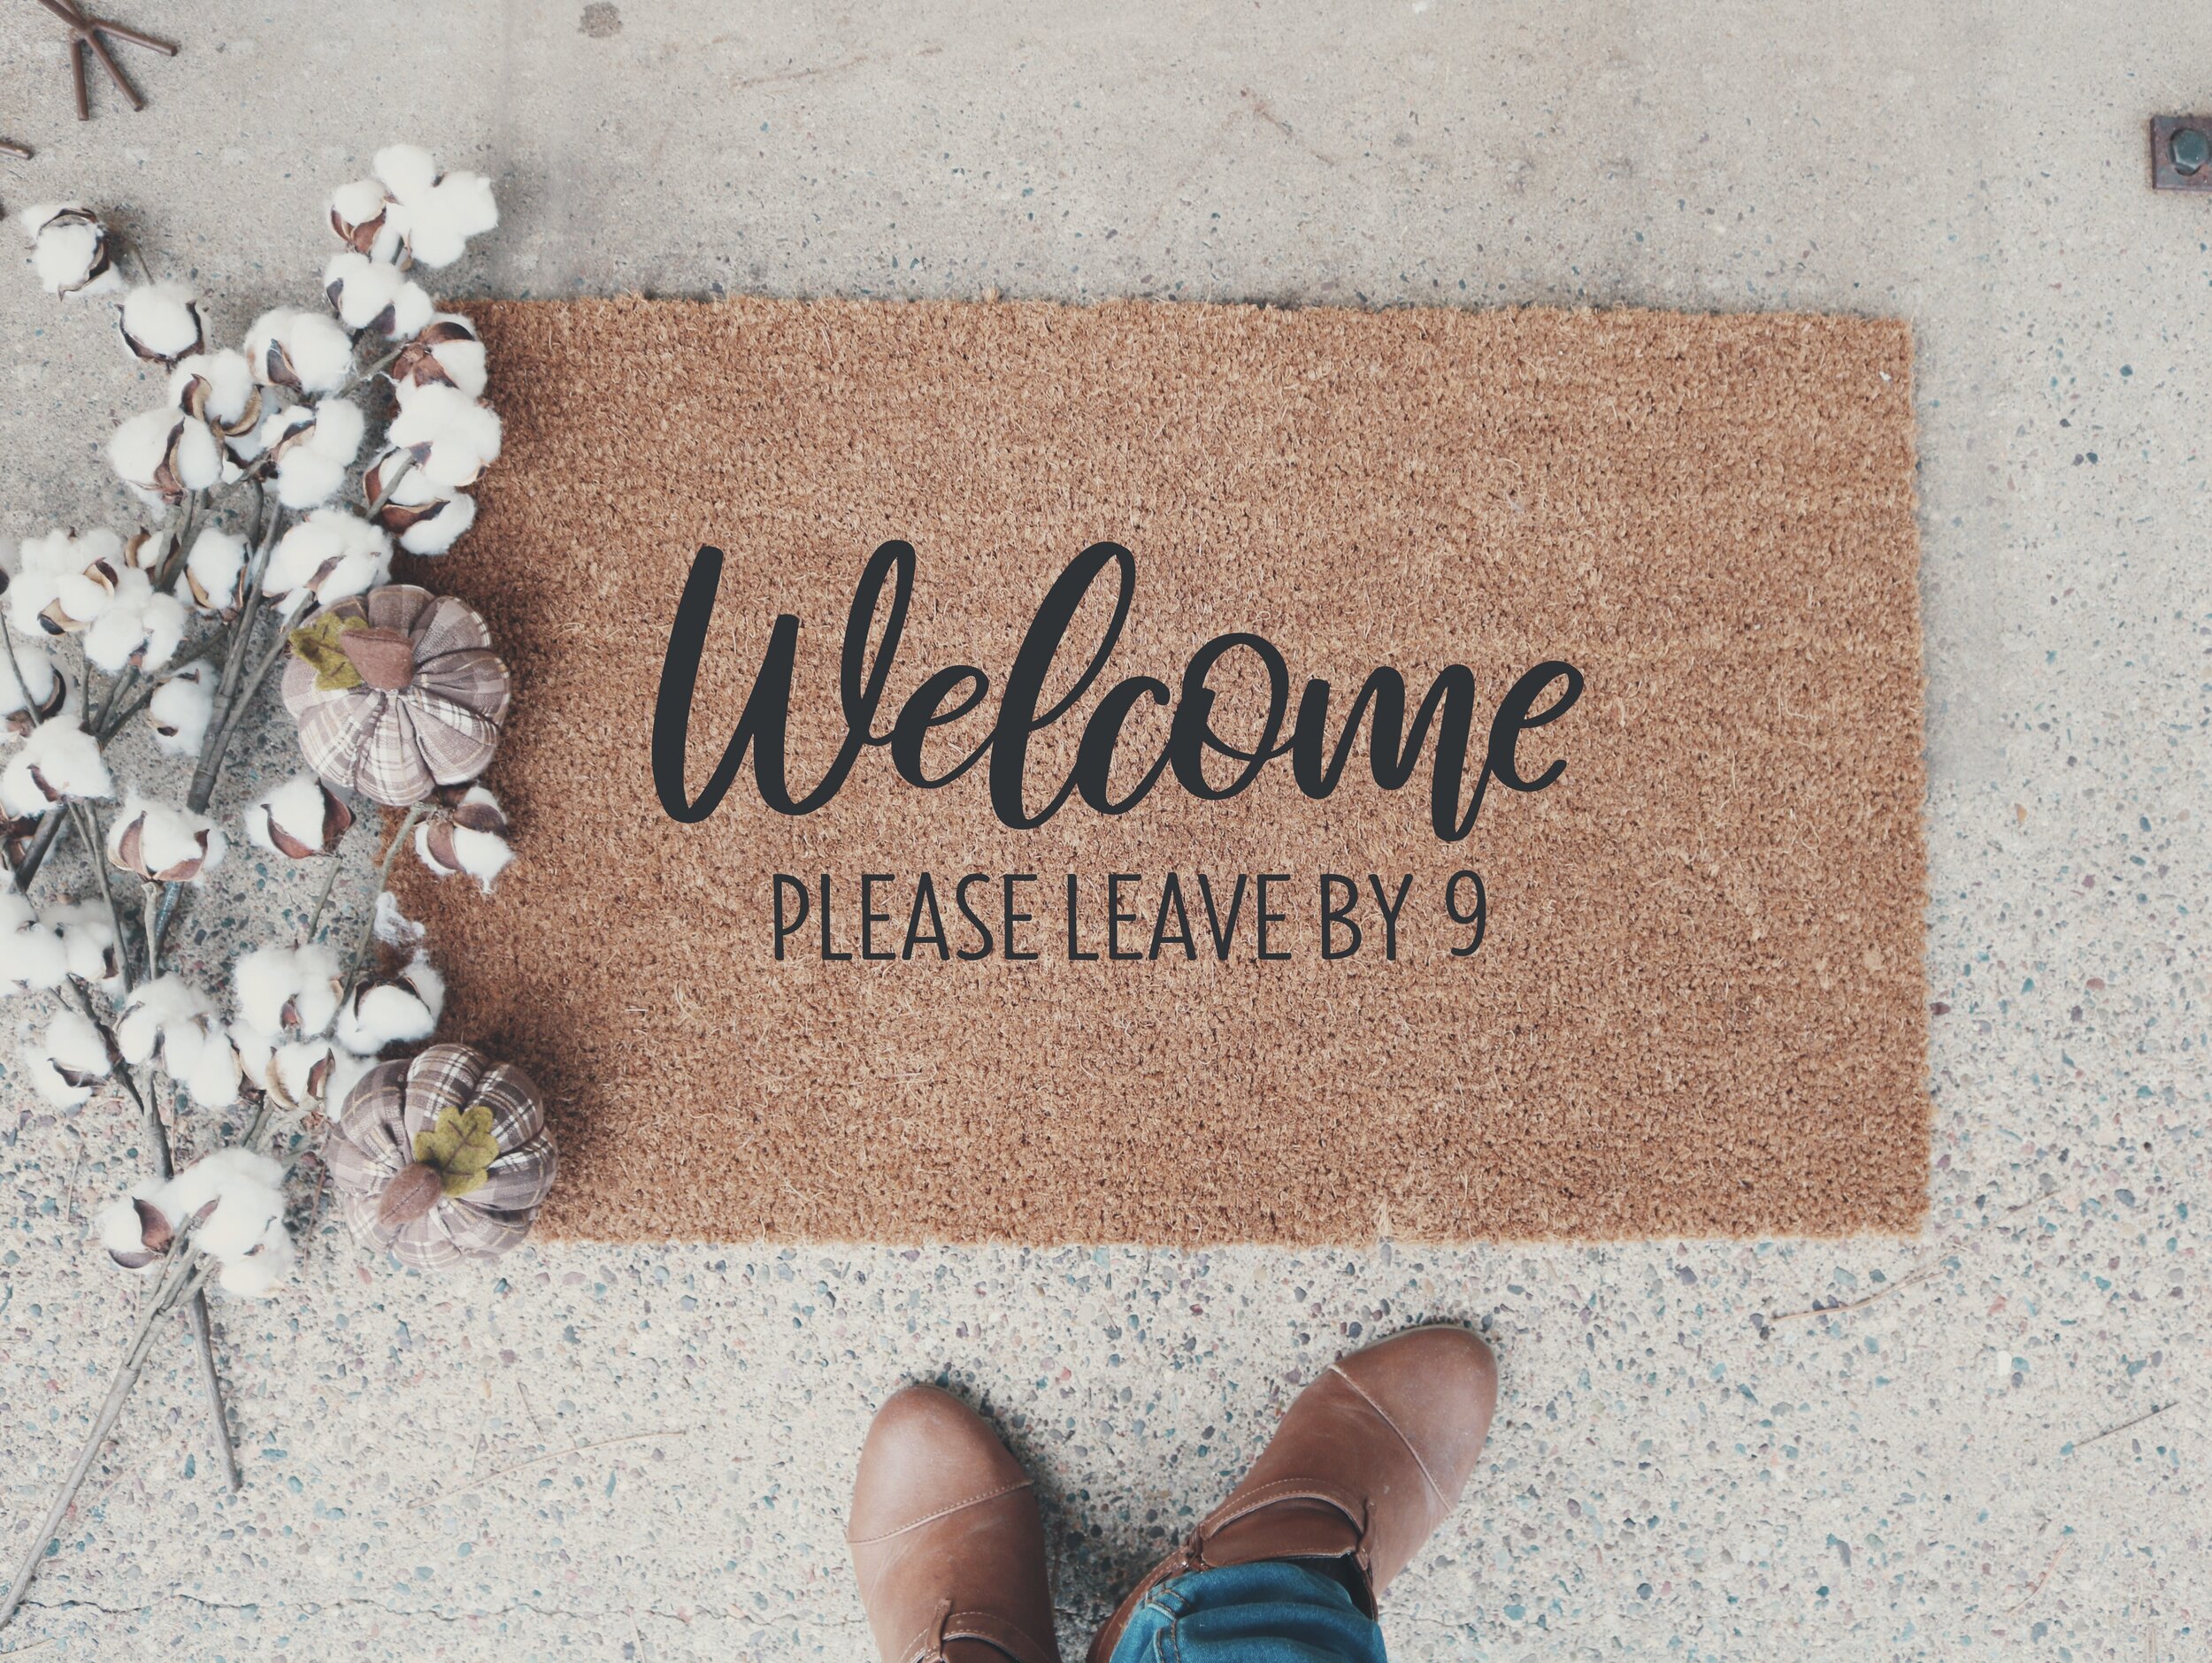 Welcome Please Leave by 9.jpg